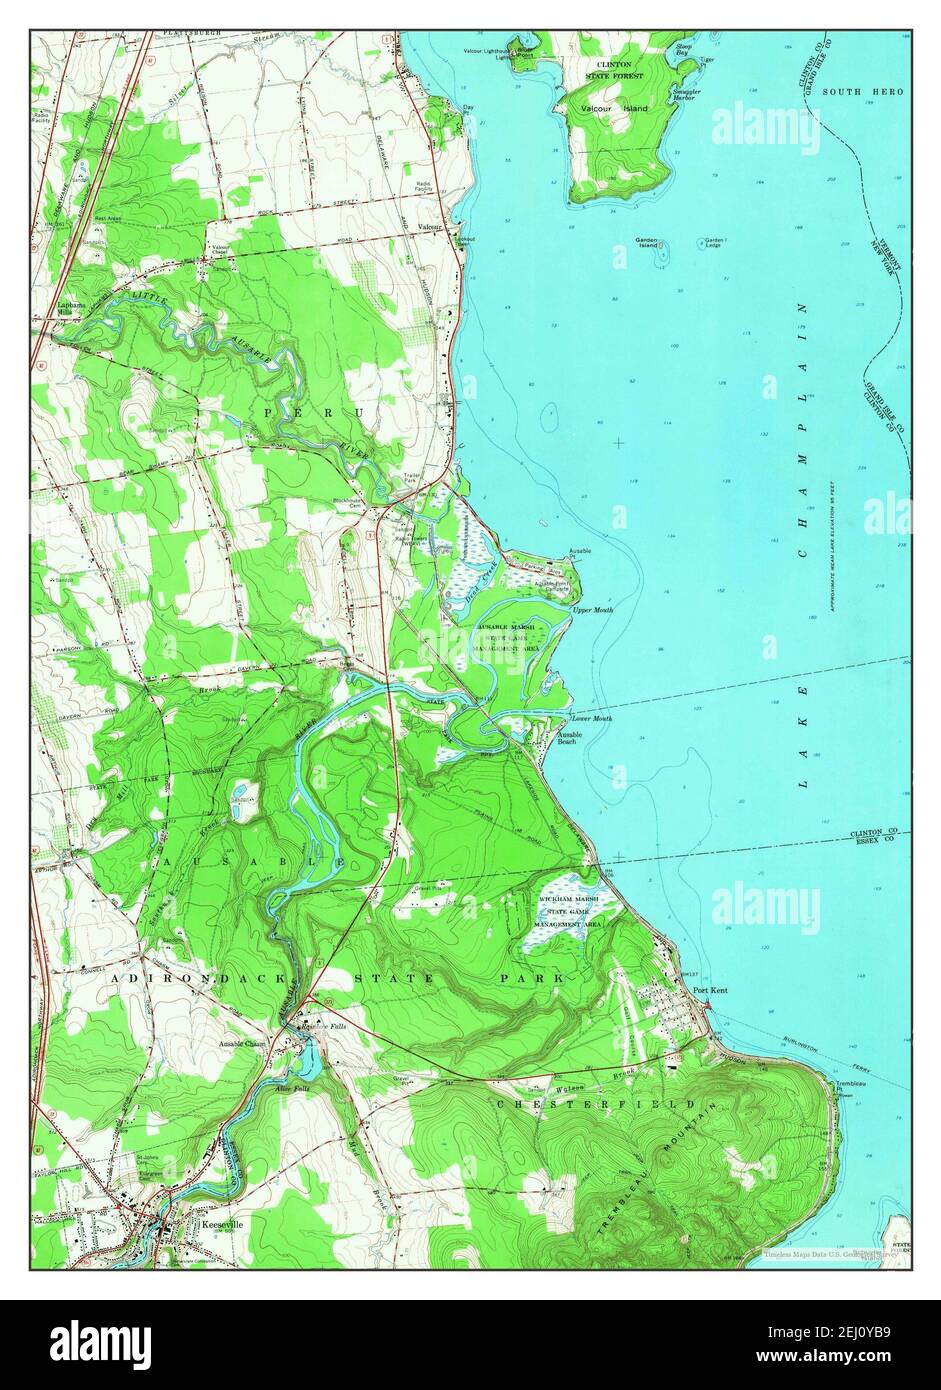 Keeseville, New York, map 1966, 1:24000, United States of America by Timeless Maps, data U.S. Geological Survey Stock Photo